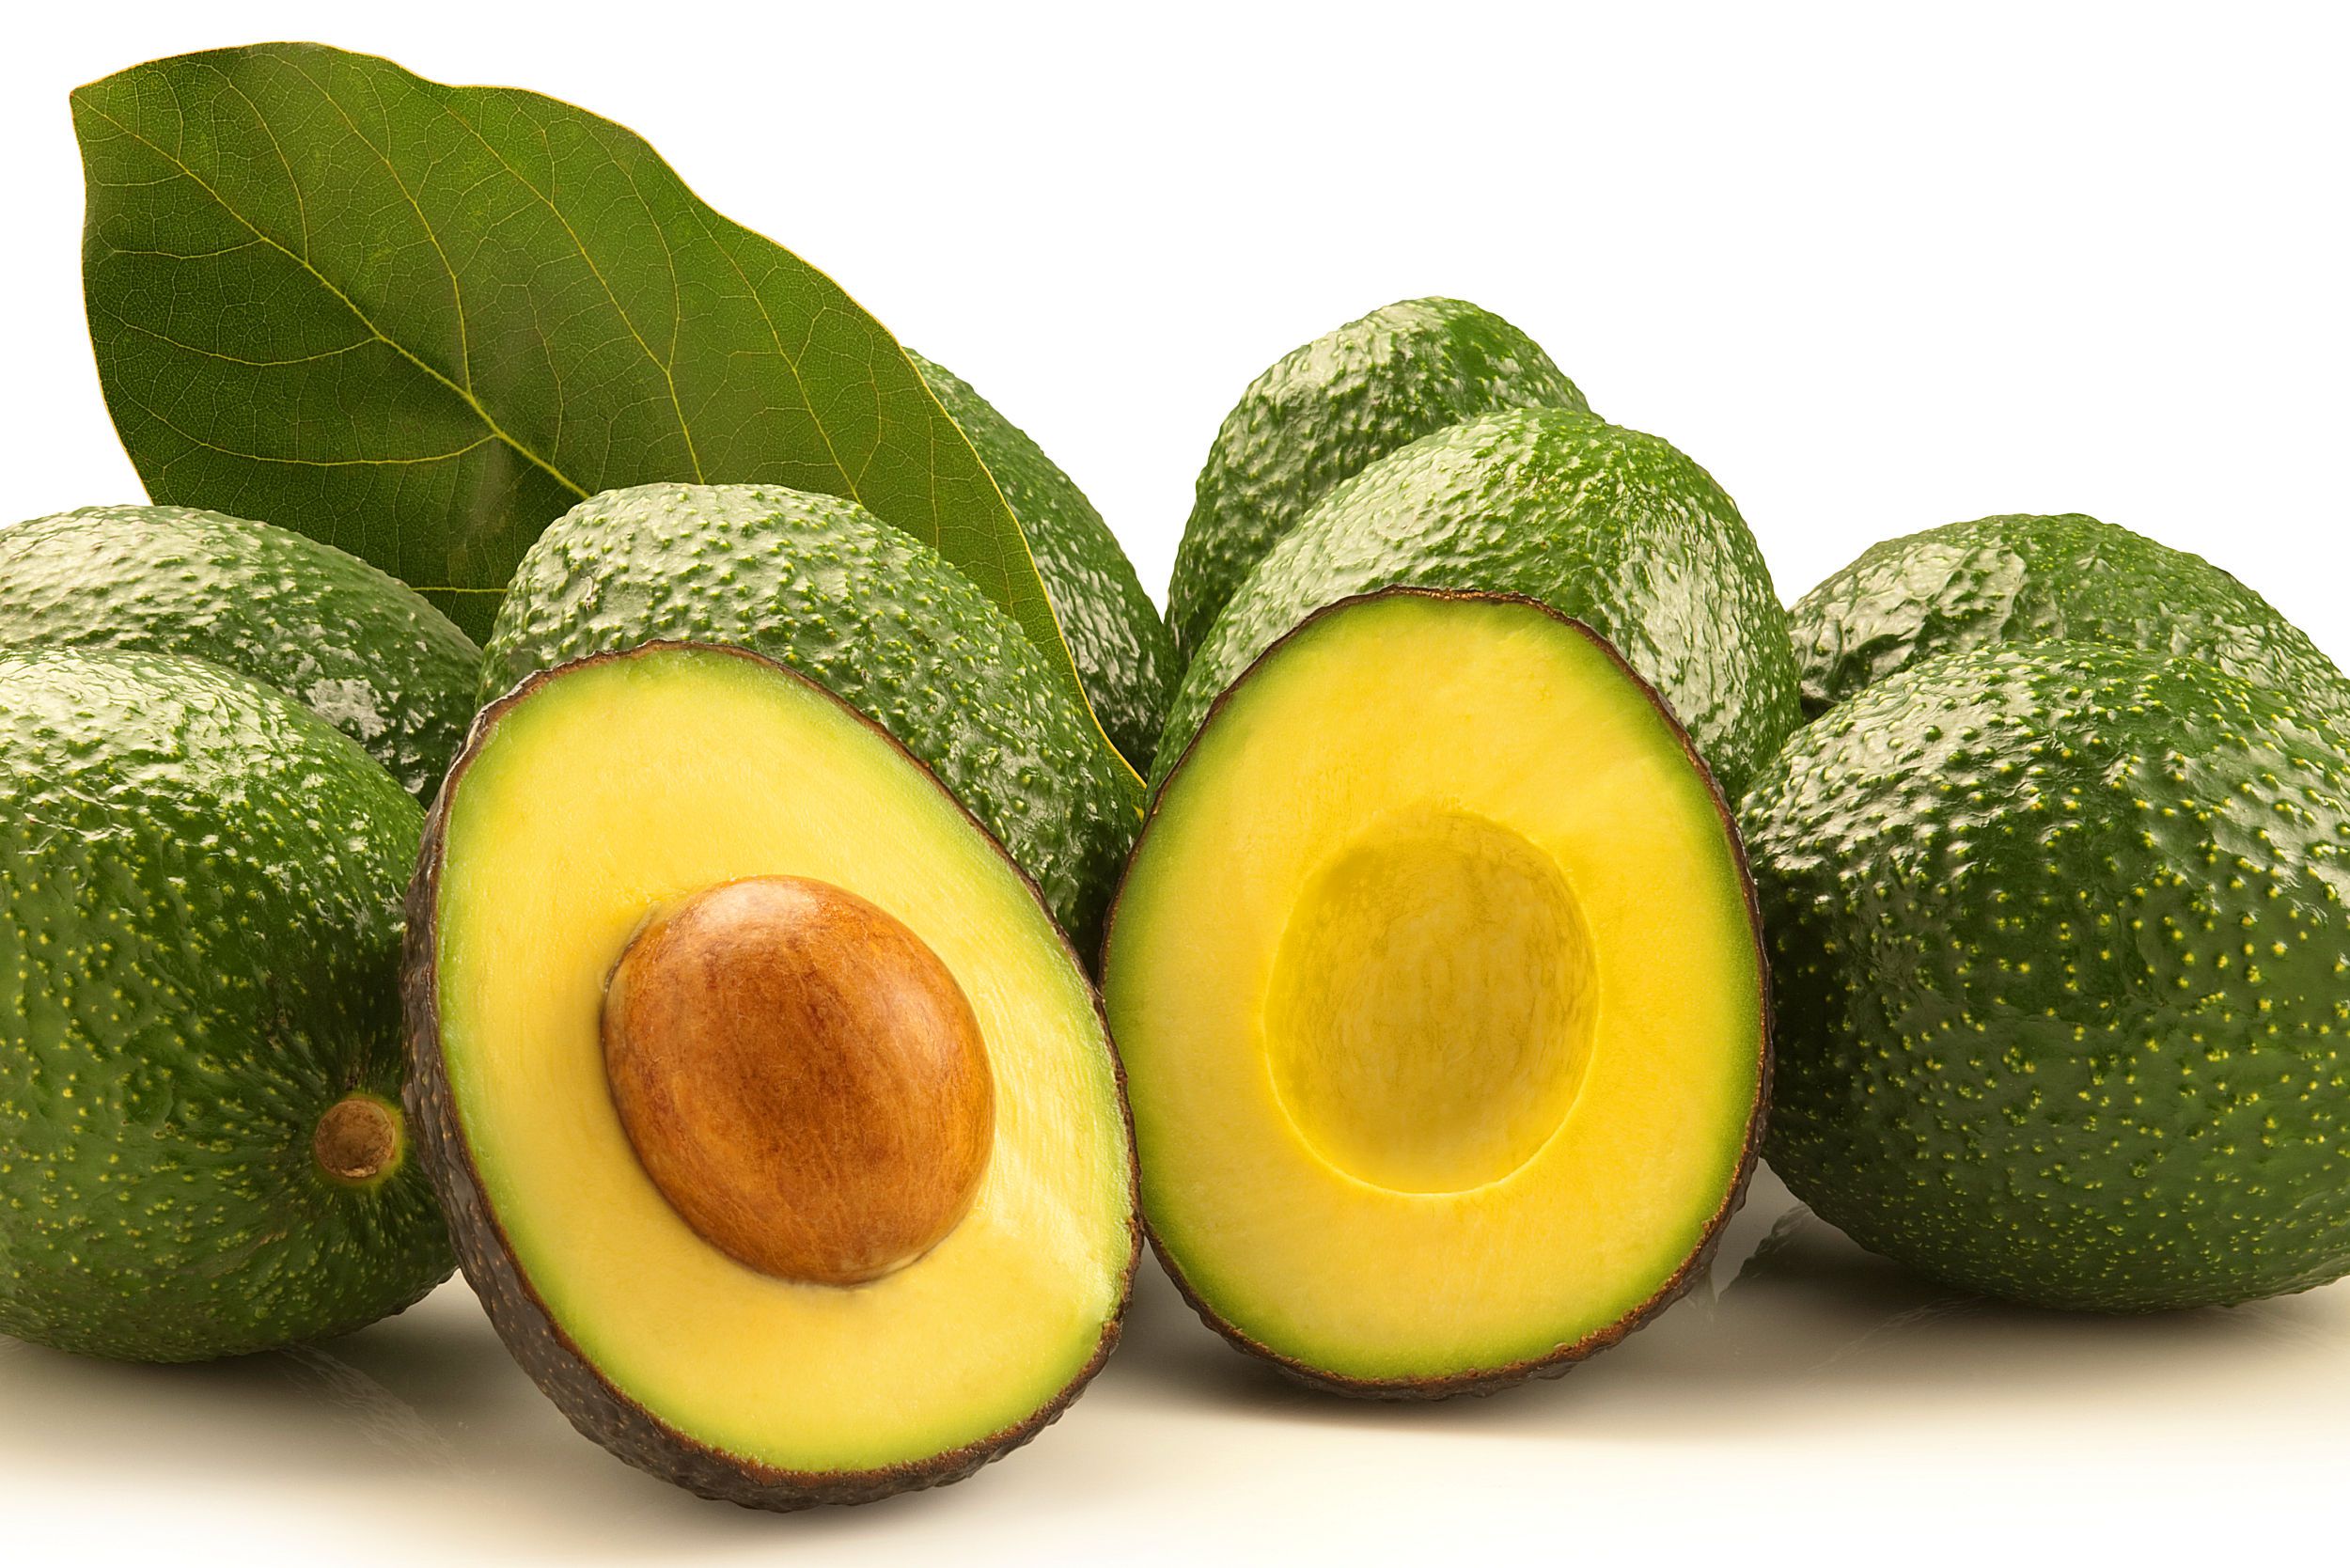 Are Avocados Good for IBS?